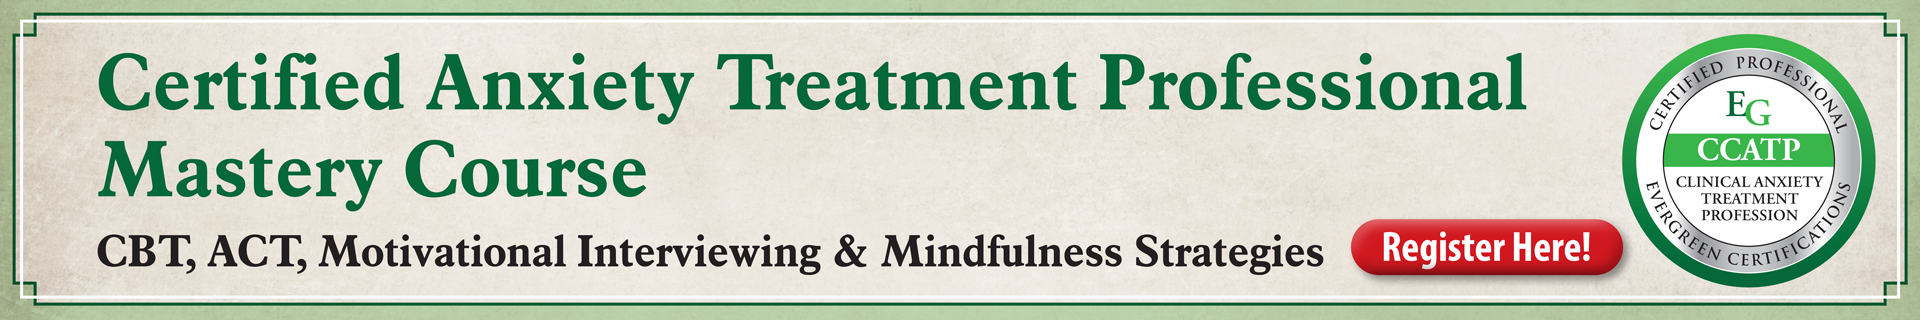 Certified Anxiety Treatment Professional Mastery Course: CBT, Motivational Interviewing & Mindfulness Strategies